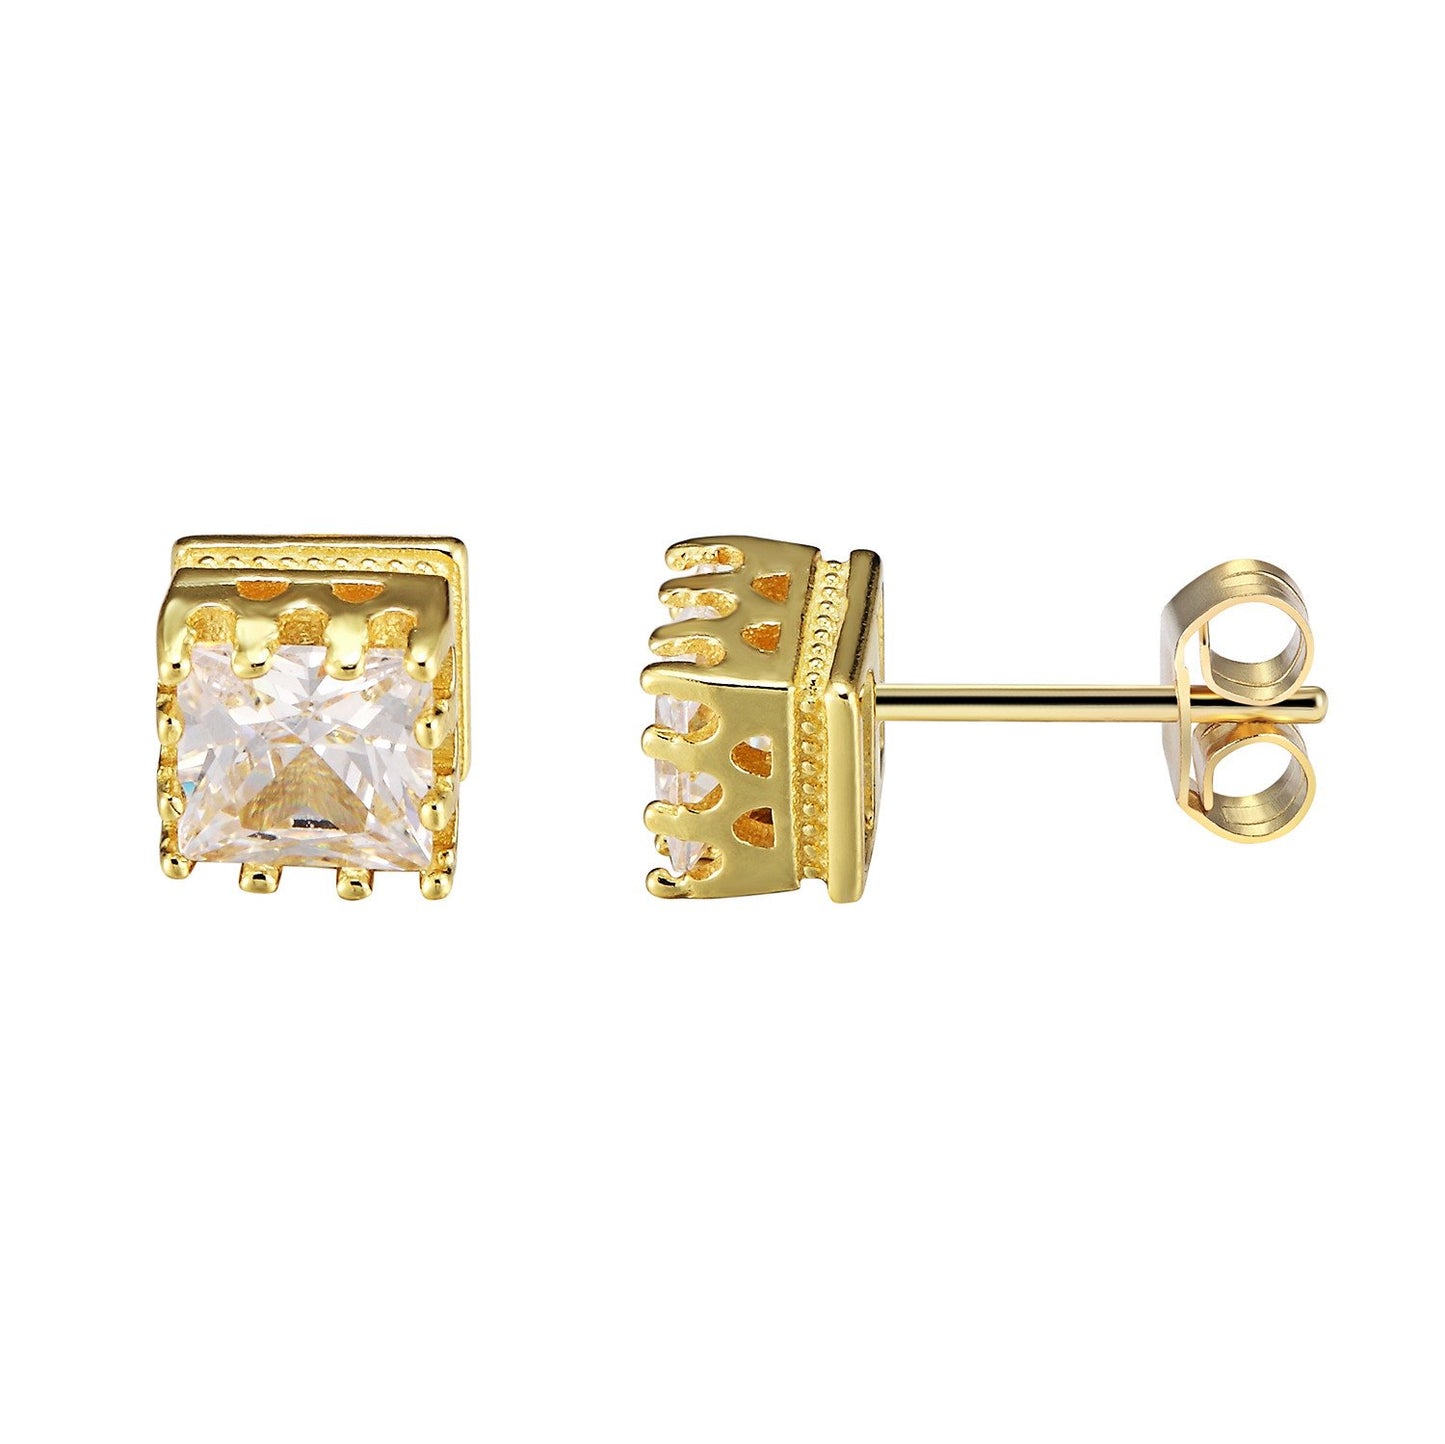 Bling 14k Gold Finish Sterling Silver Square Shape Prong Solitaire Earrings